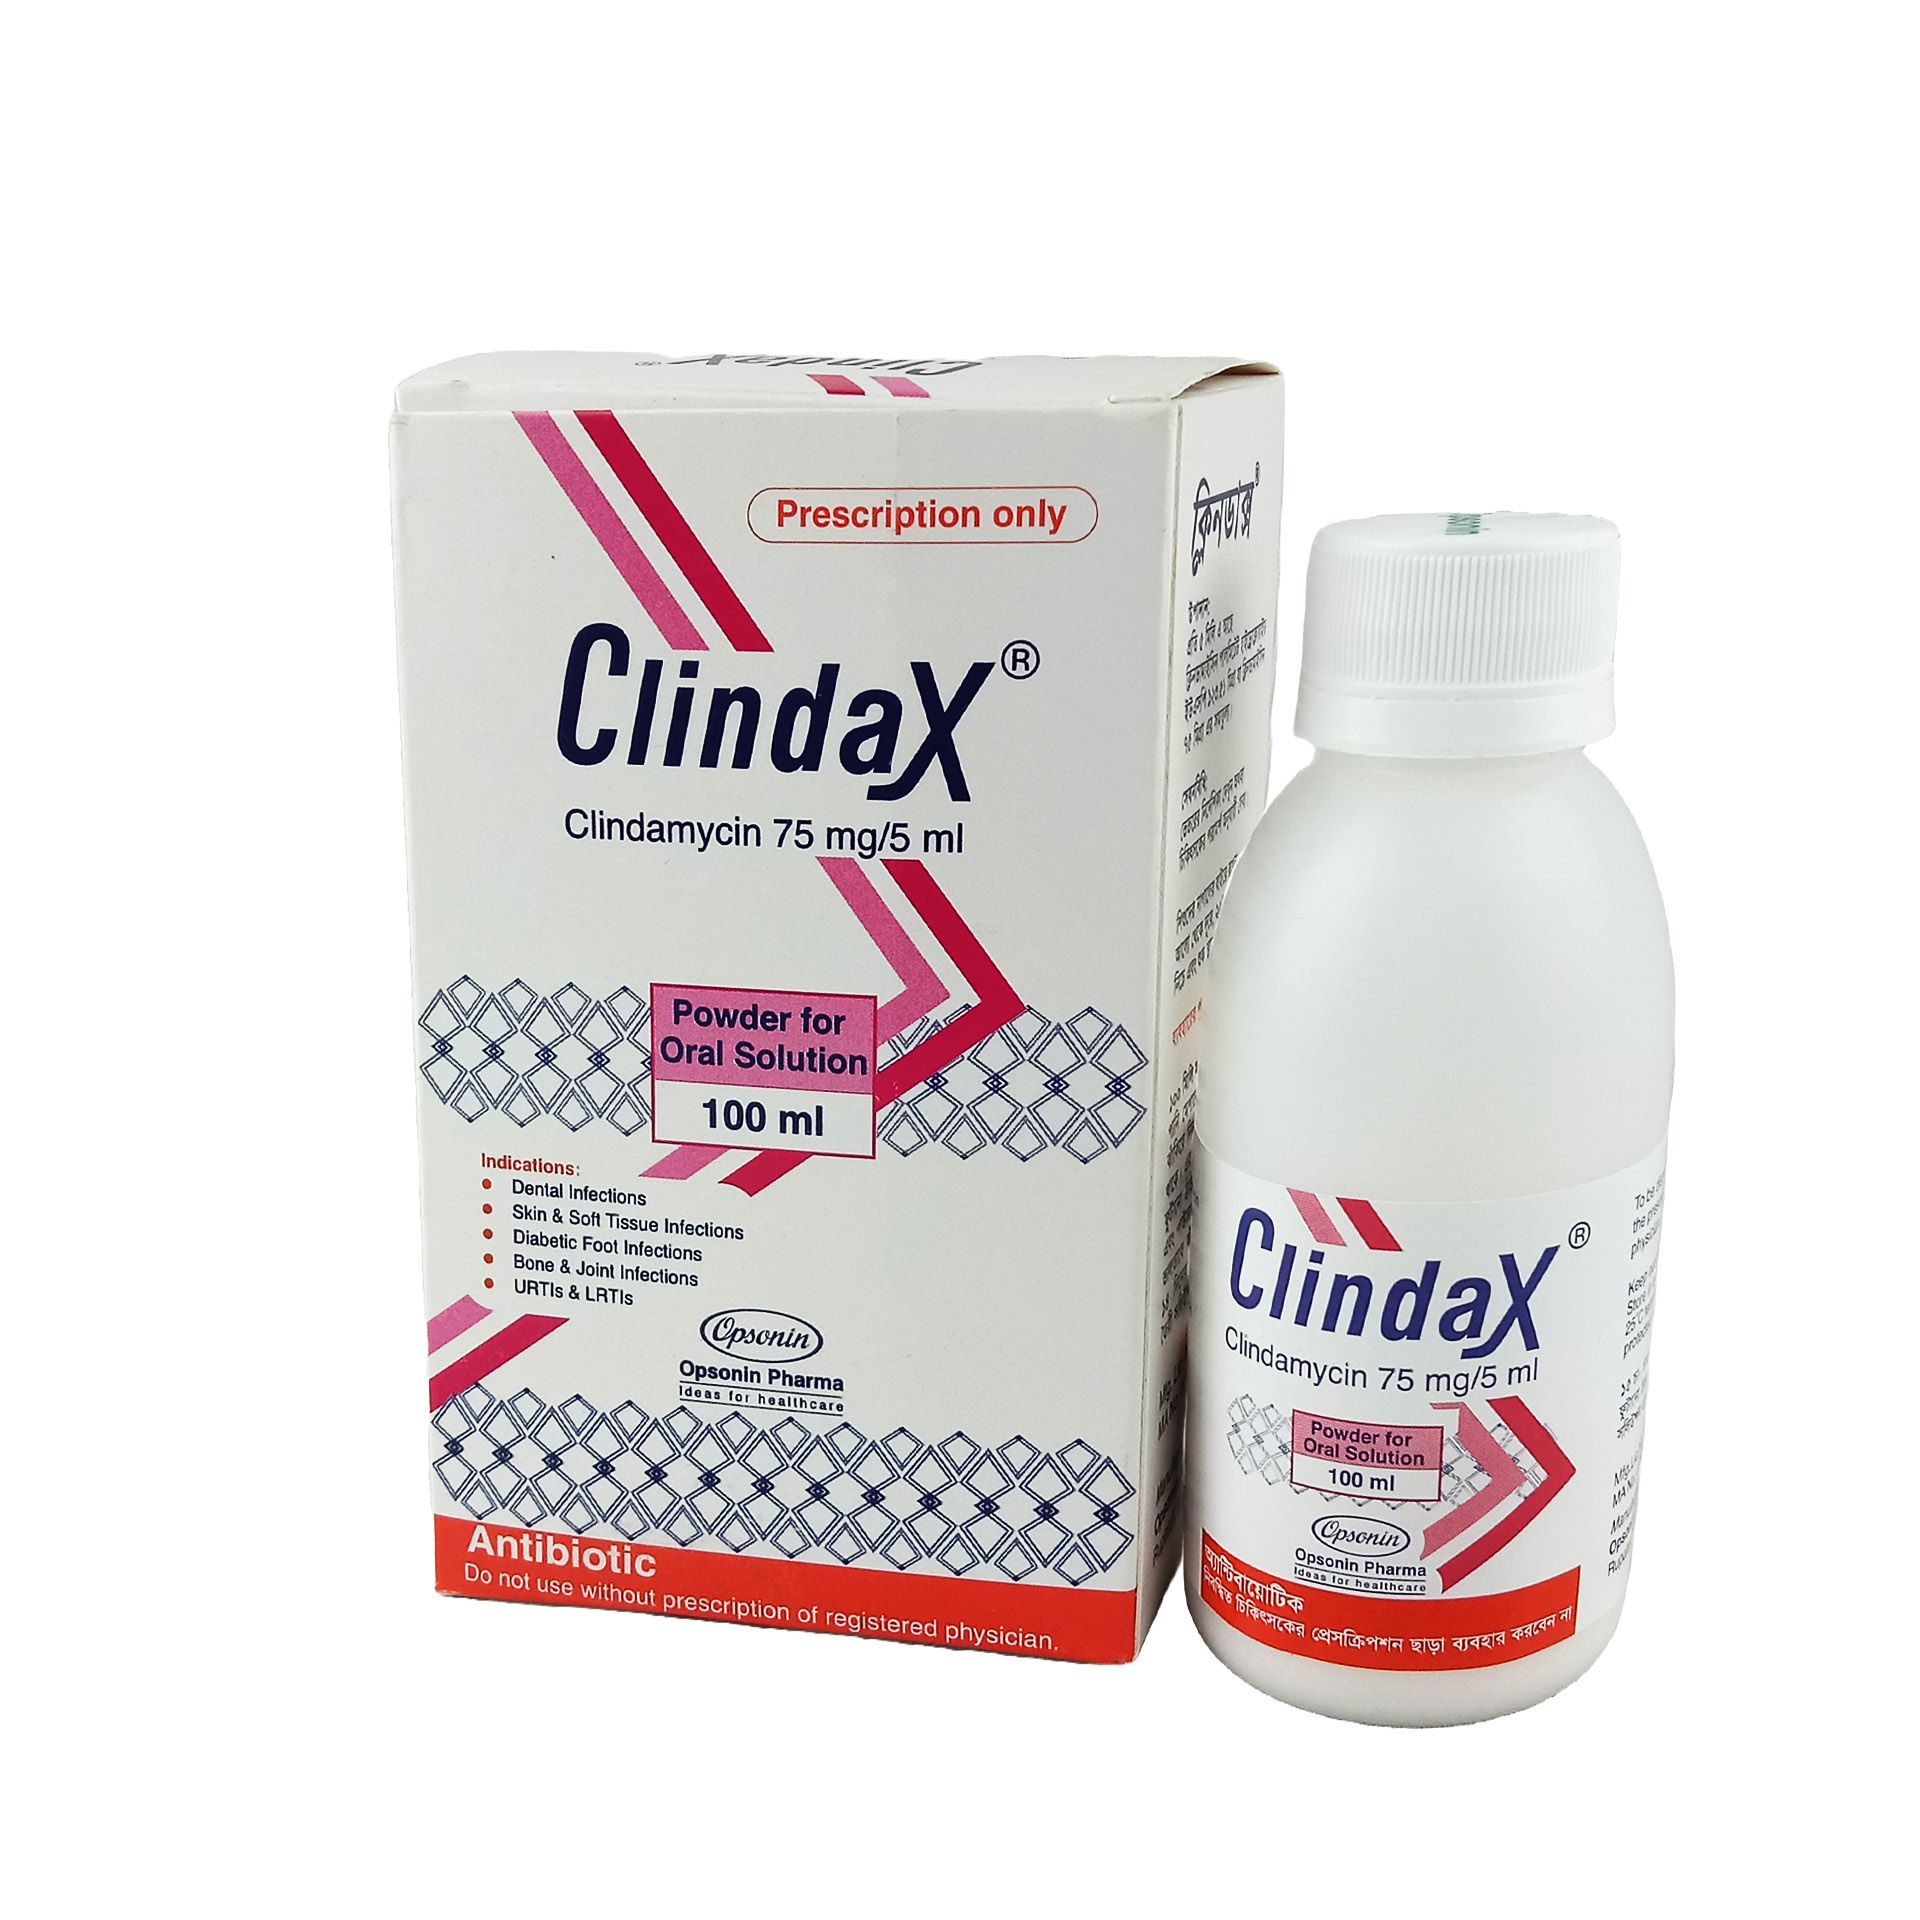 Clindax 75mg/5ml Powder for Suspension